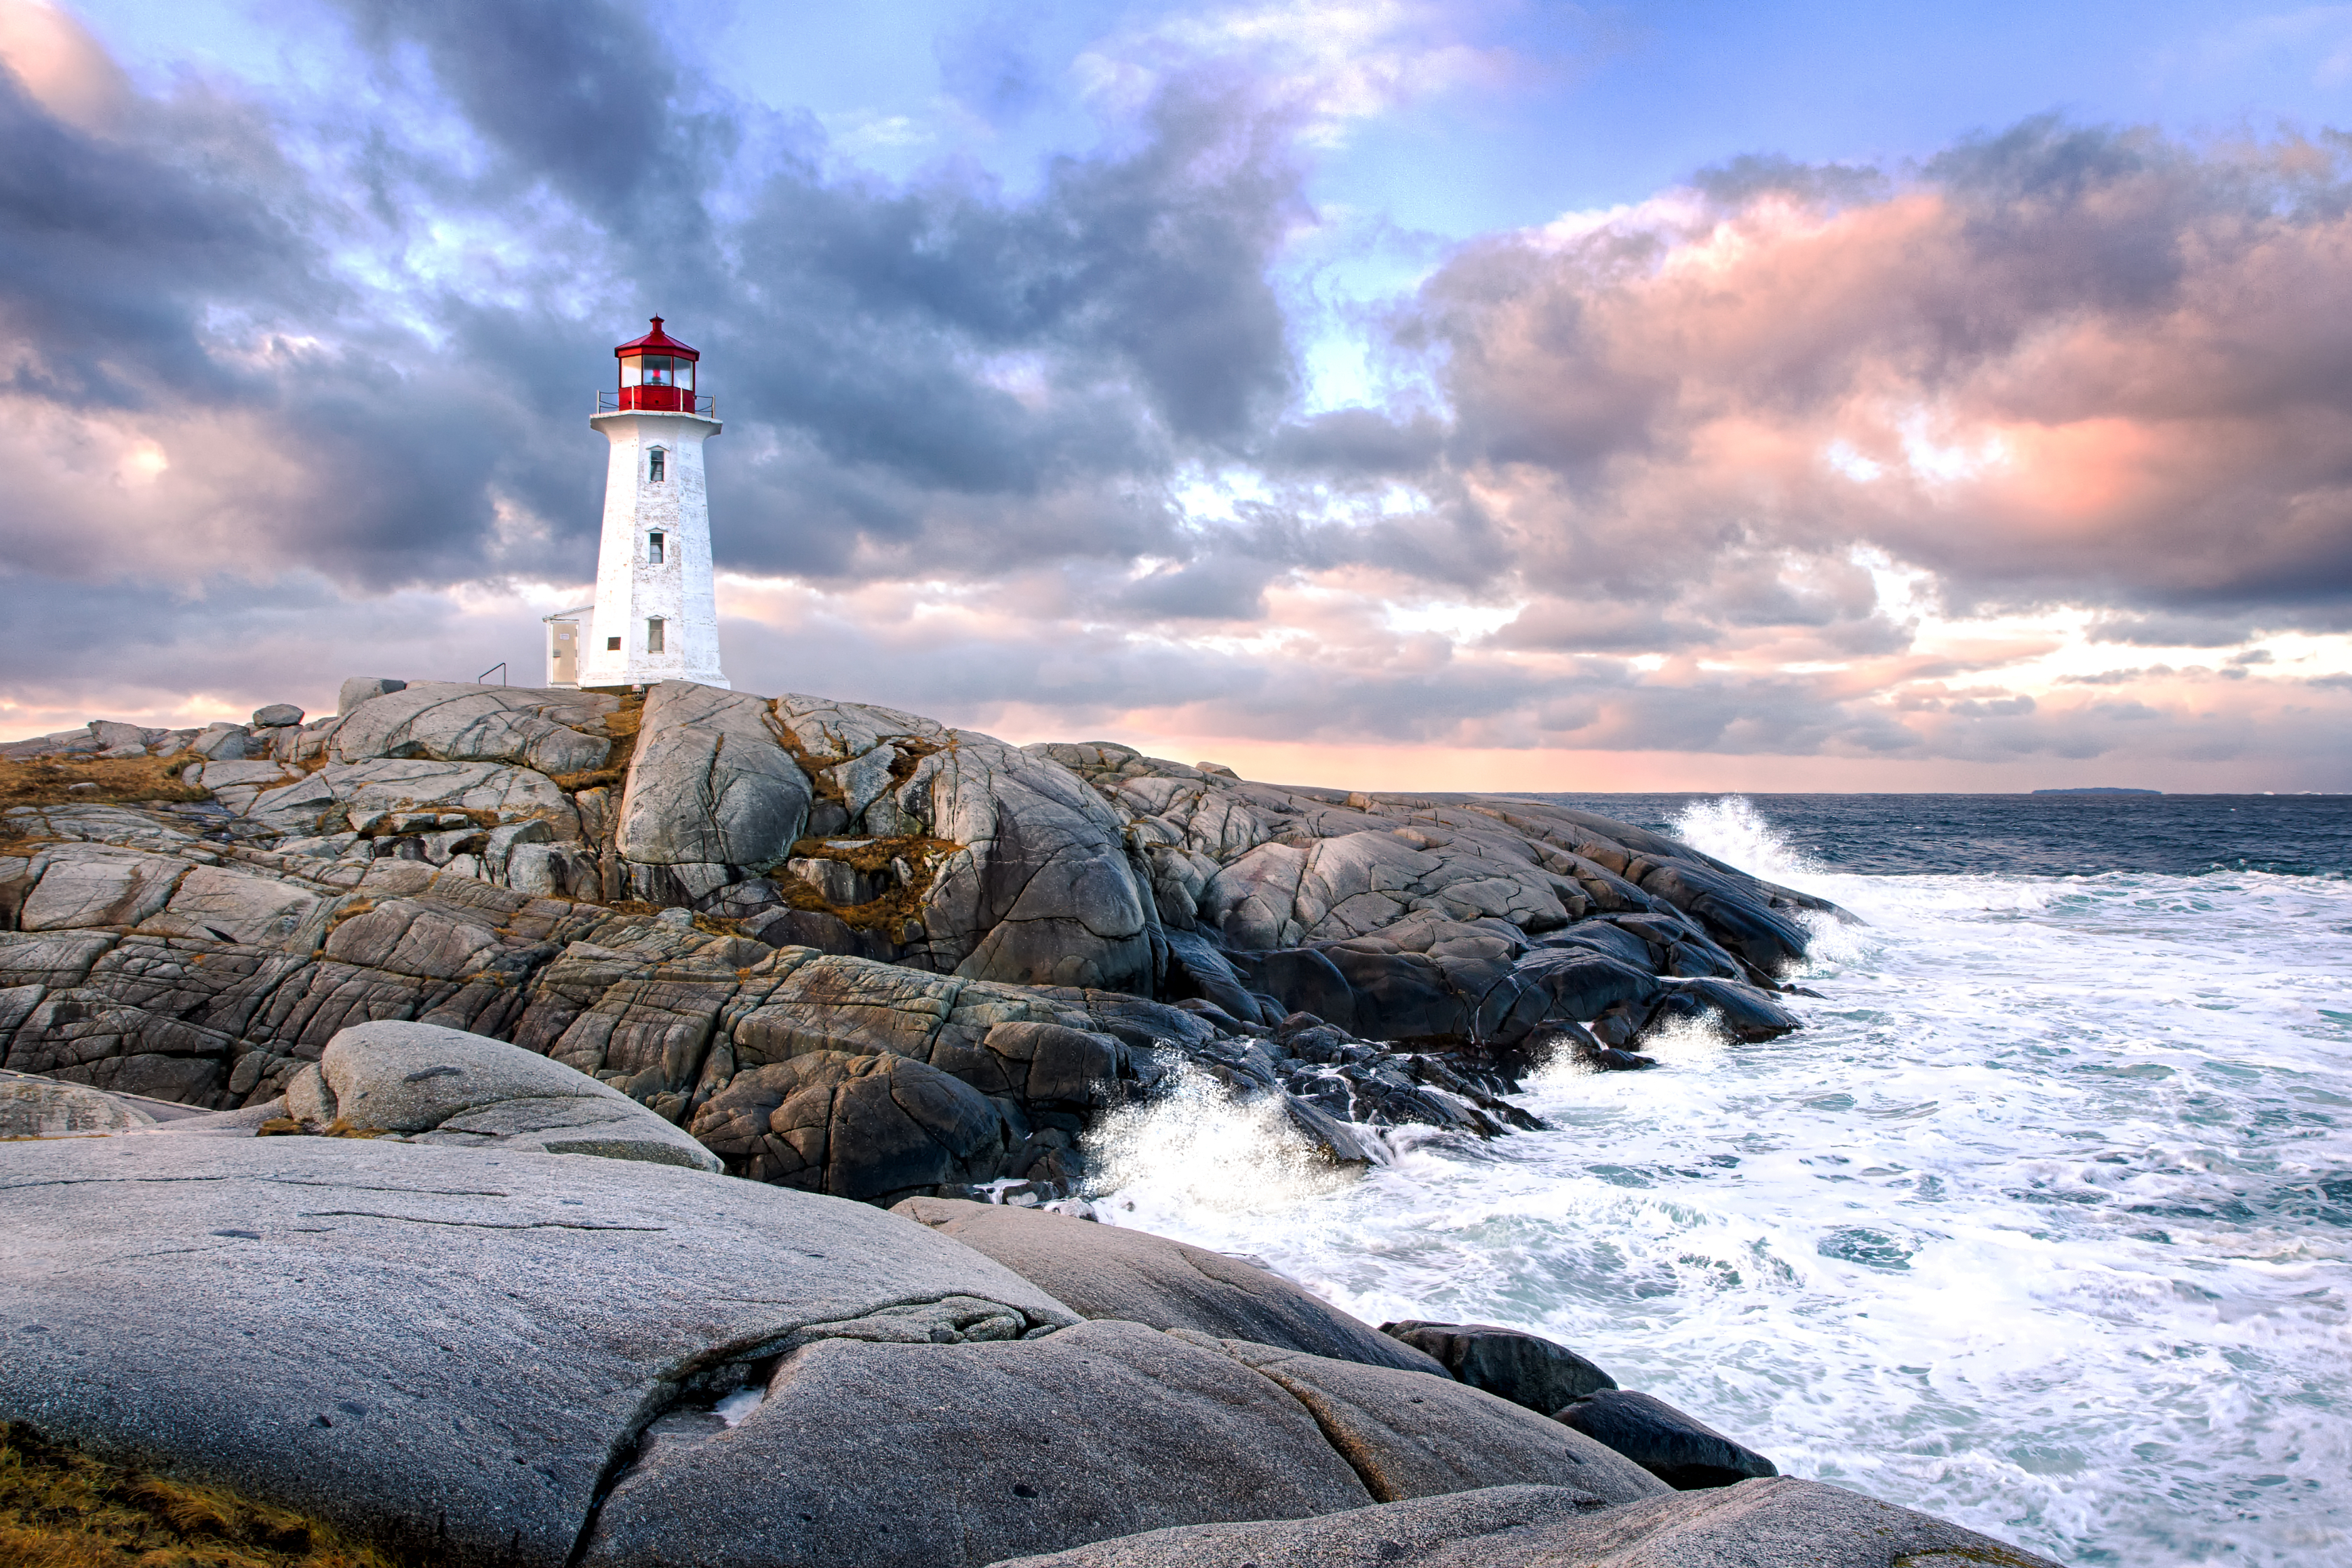 Lighthouse on rocky shore with waves crashing and cloudy sky in the background